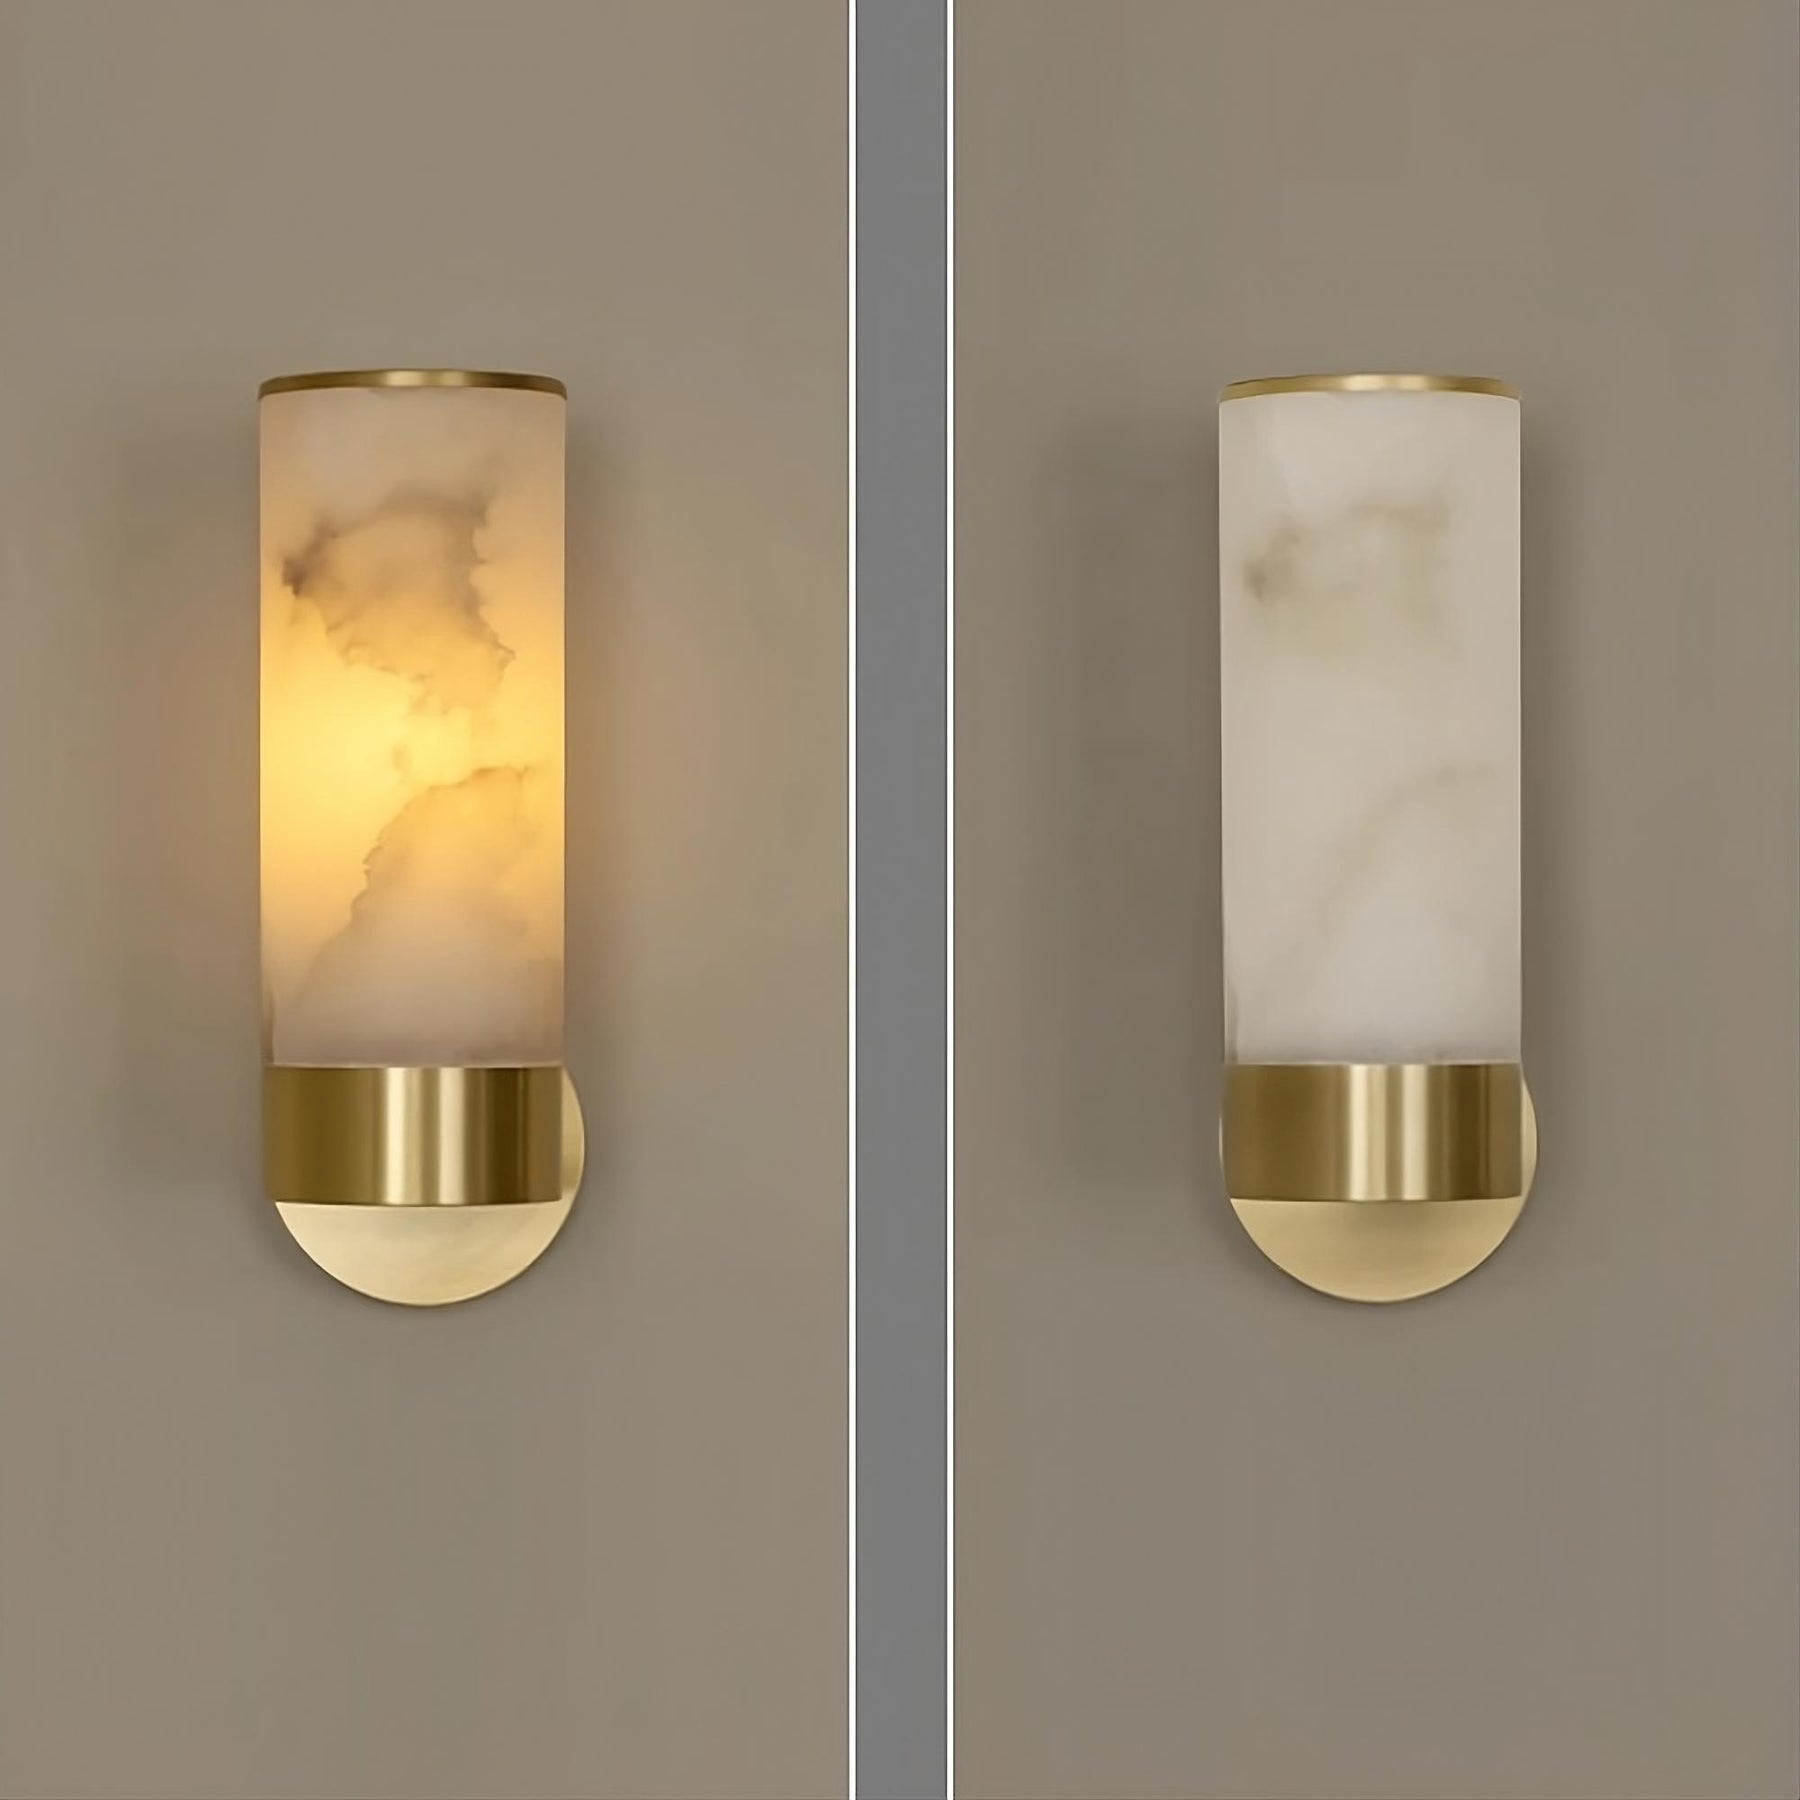 Moonshade Natural Marble & Brass Wall Sconce